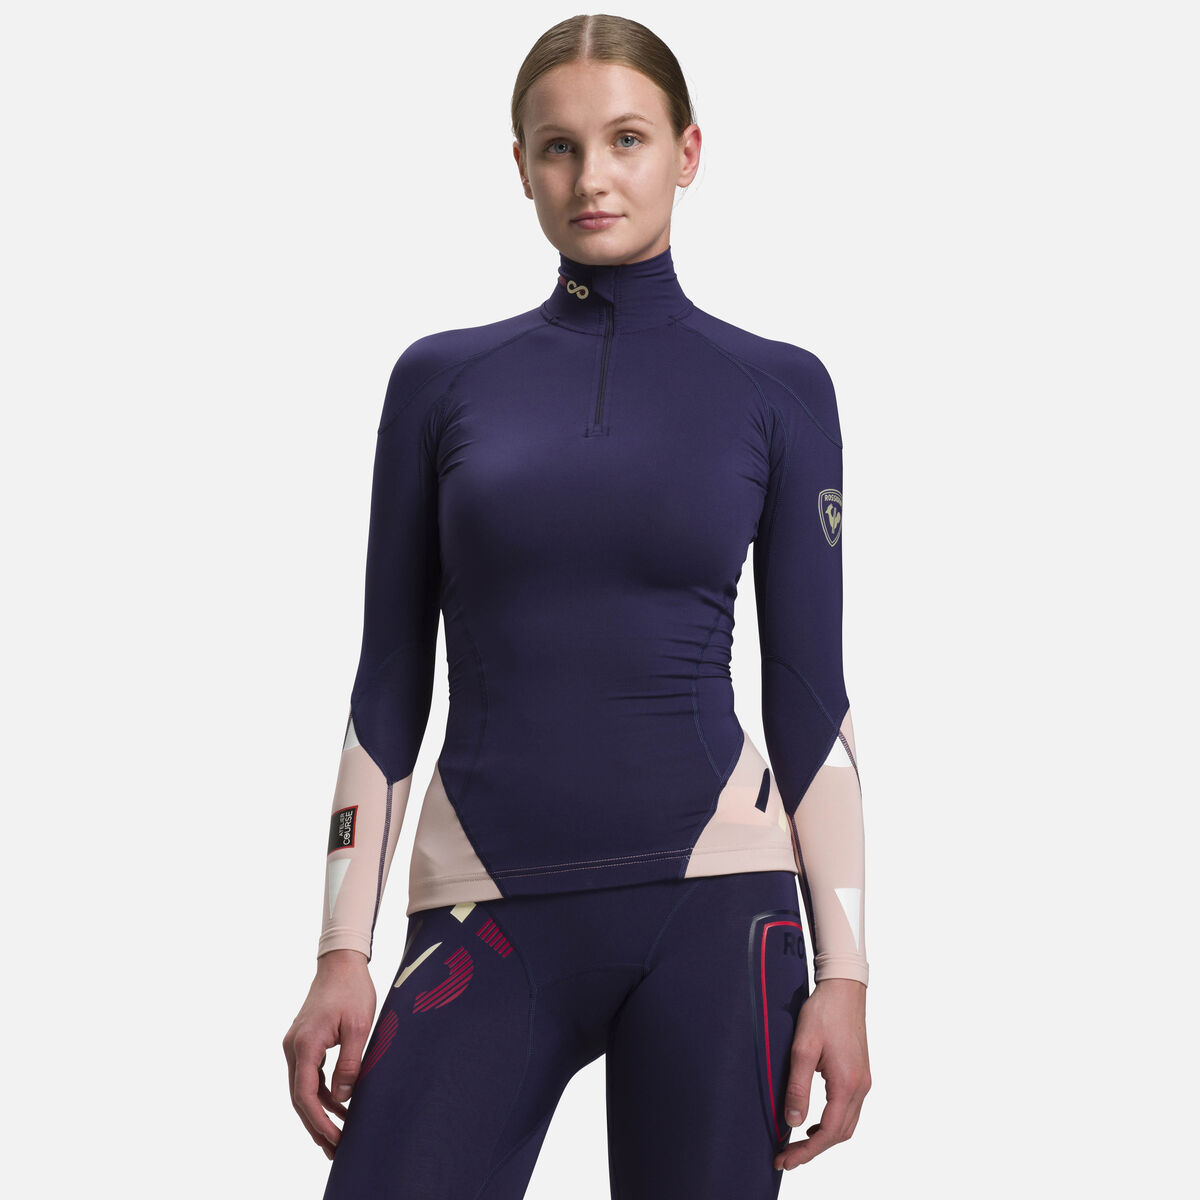 Rossignol Infini Compression Race Top - Base layer - Women's